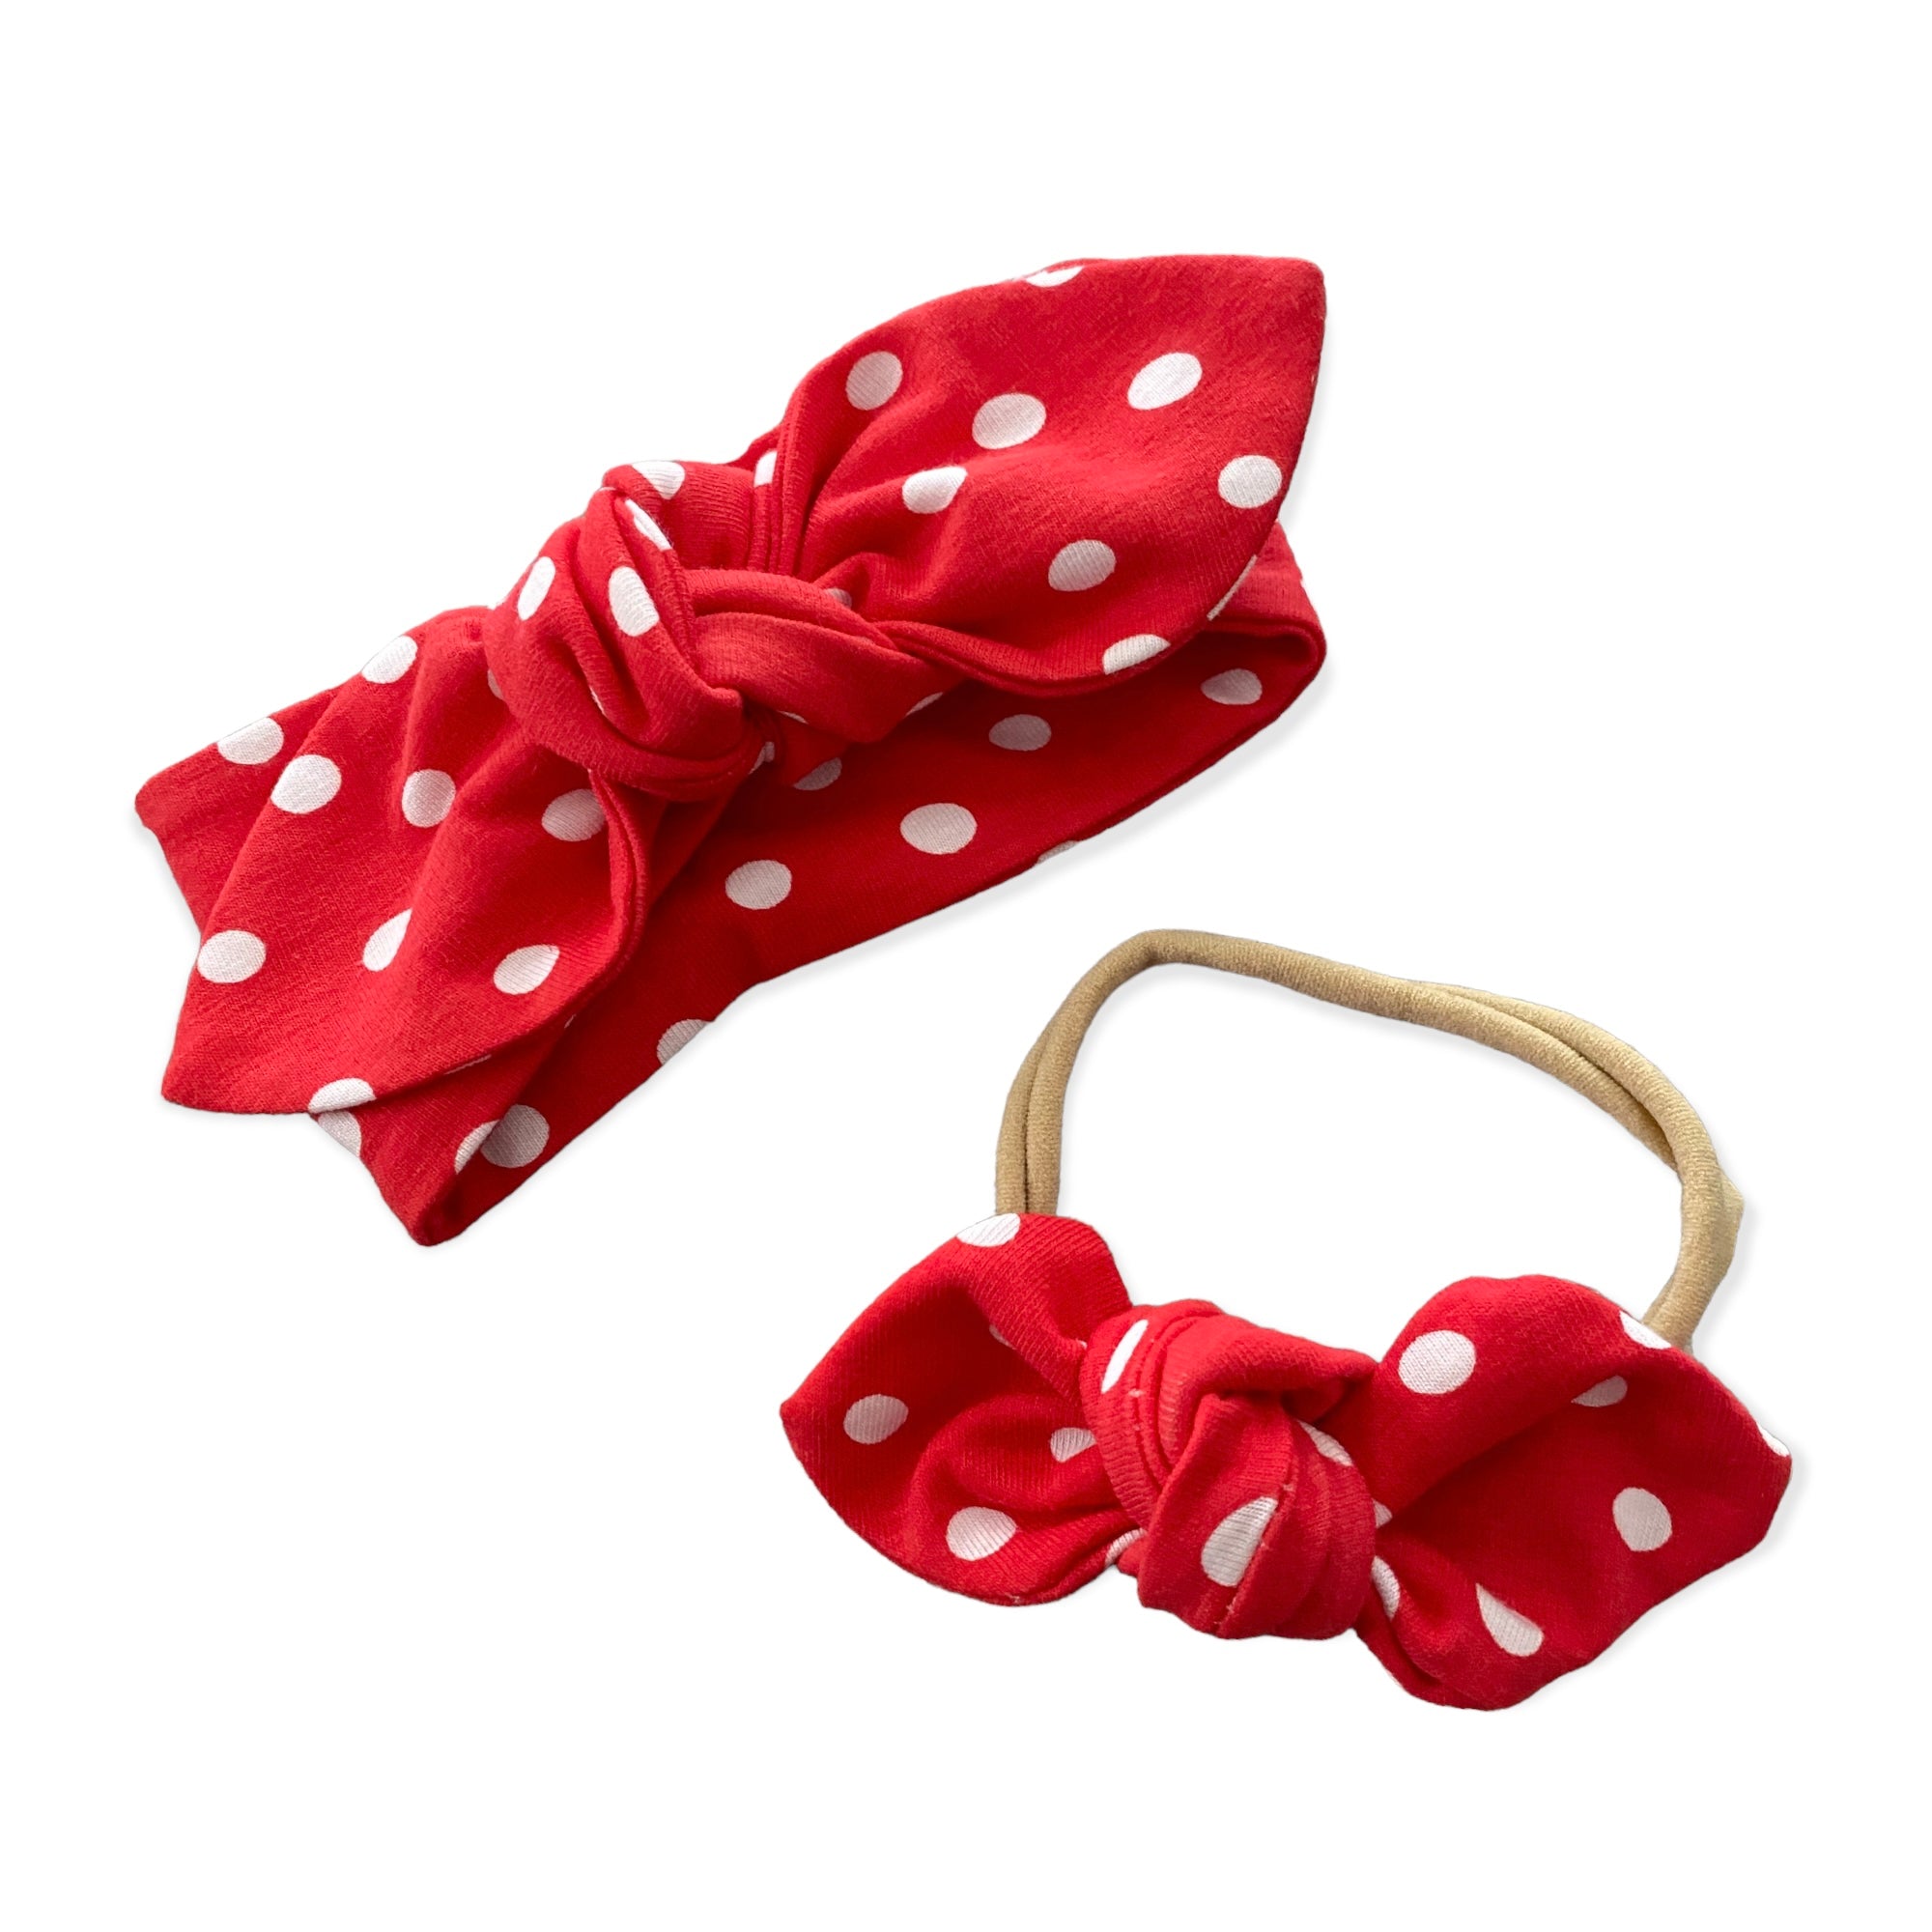 White Polka Dots on Red Leggings and/or Headbands